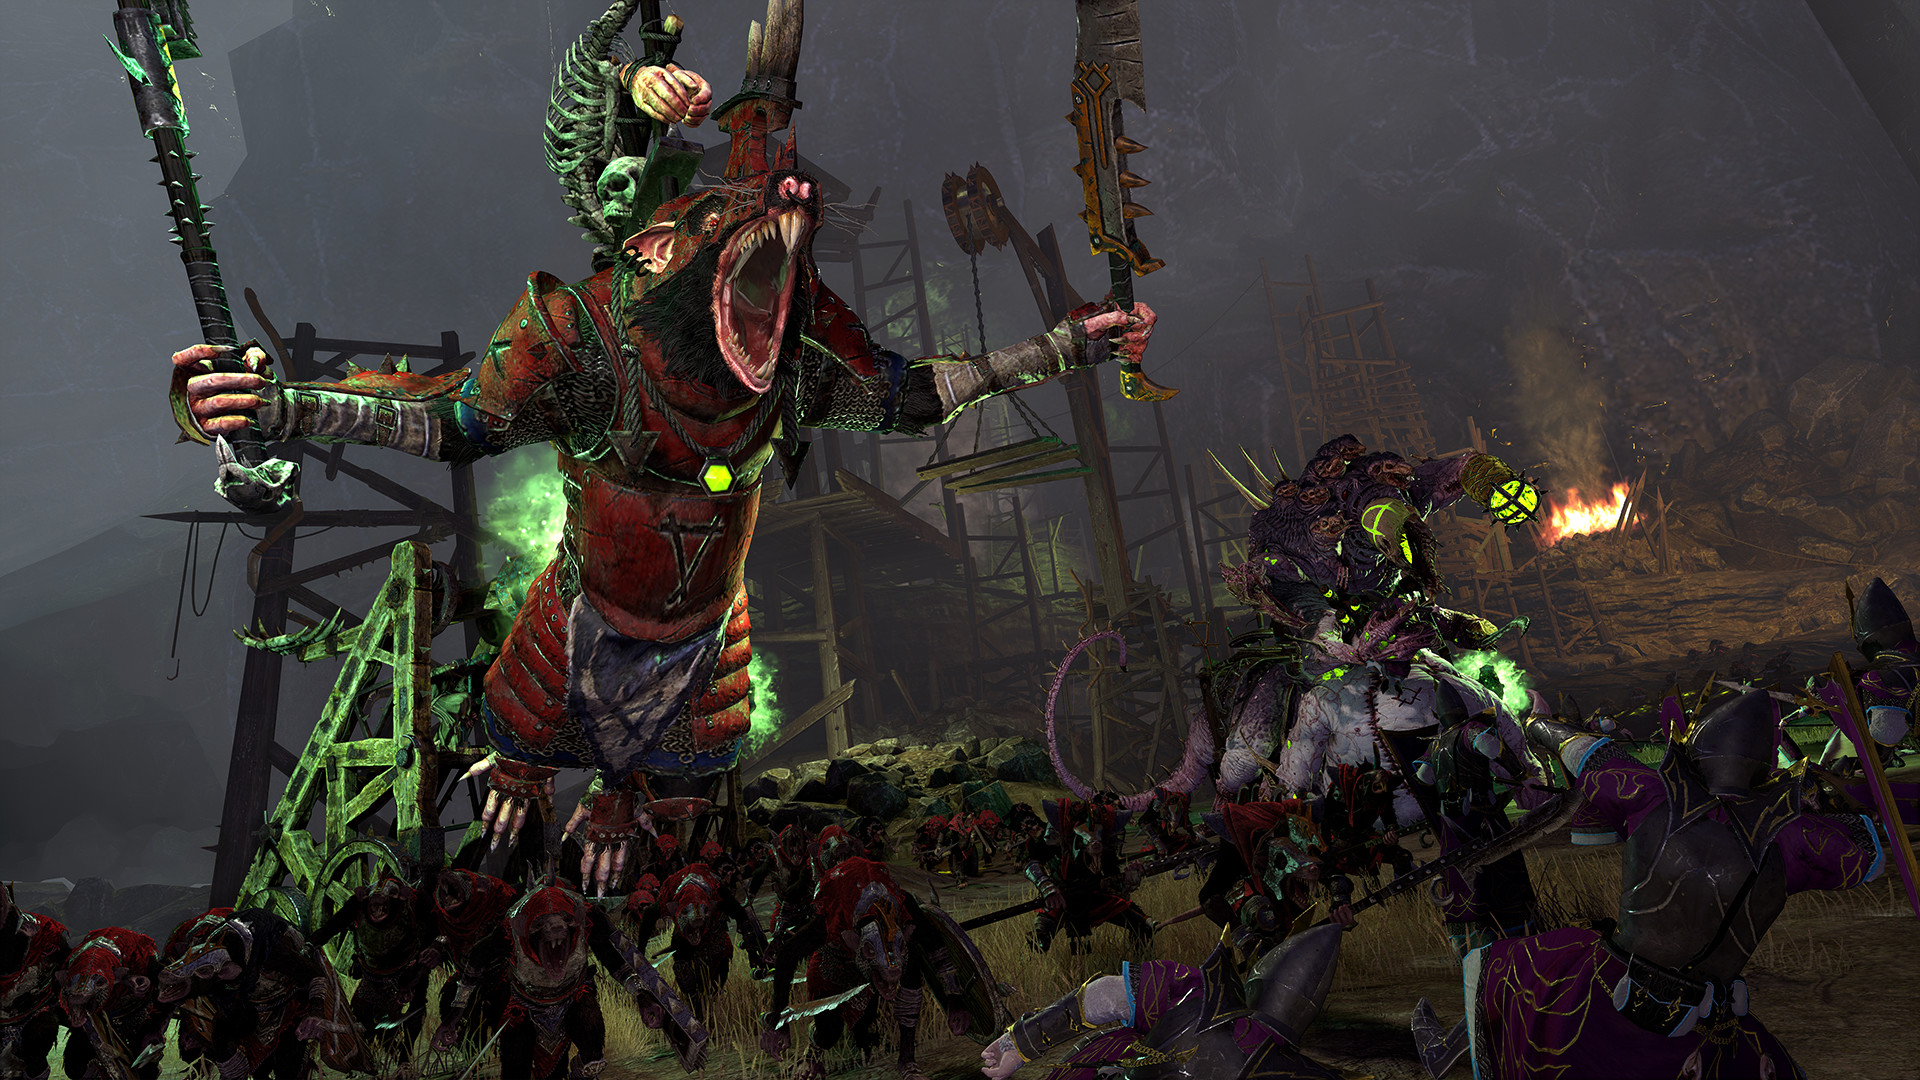 Total Warhammer 3 update 2.2 will add a new Skaven endgame crisis